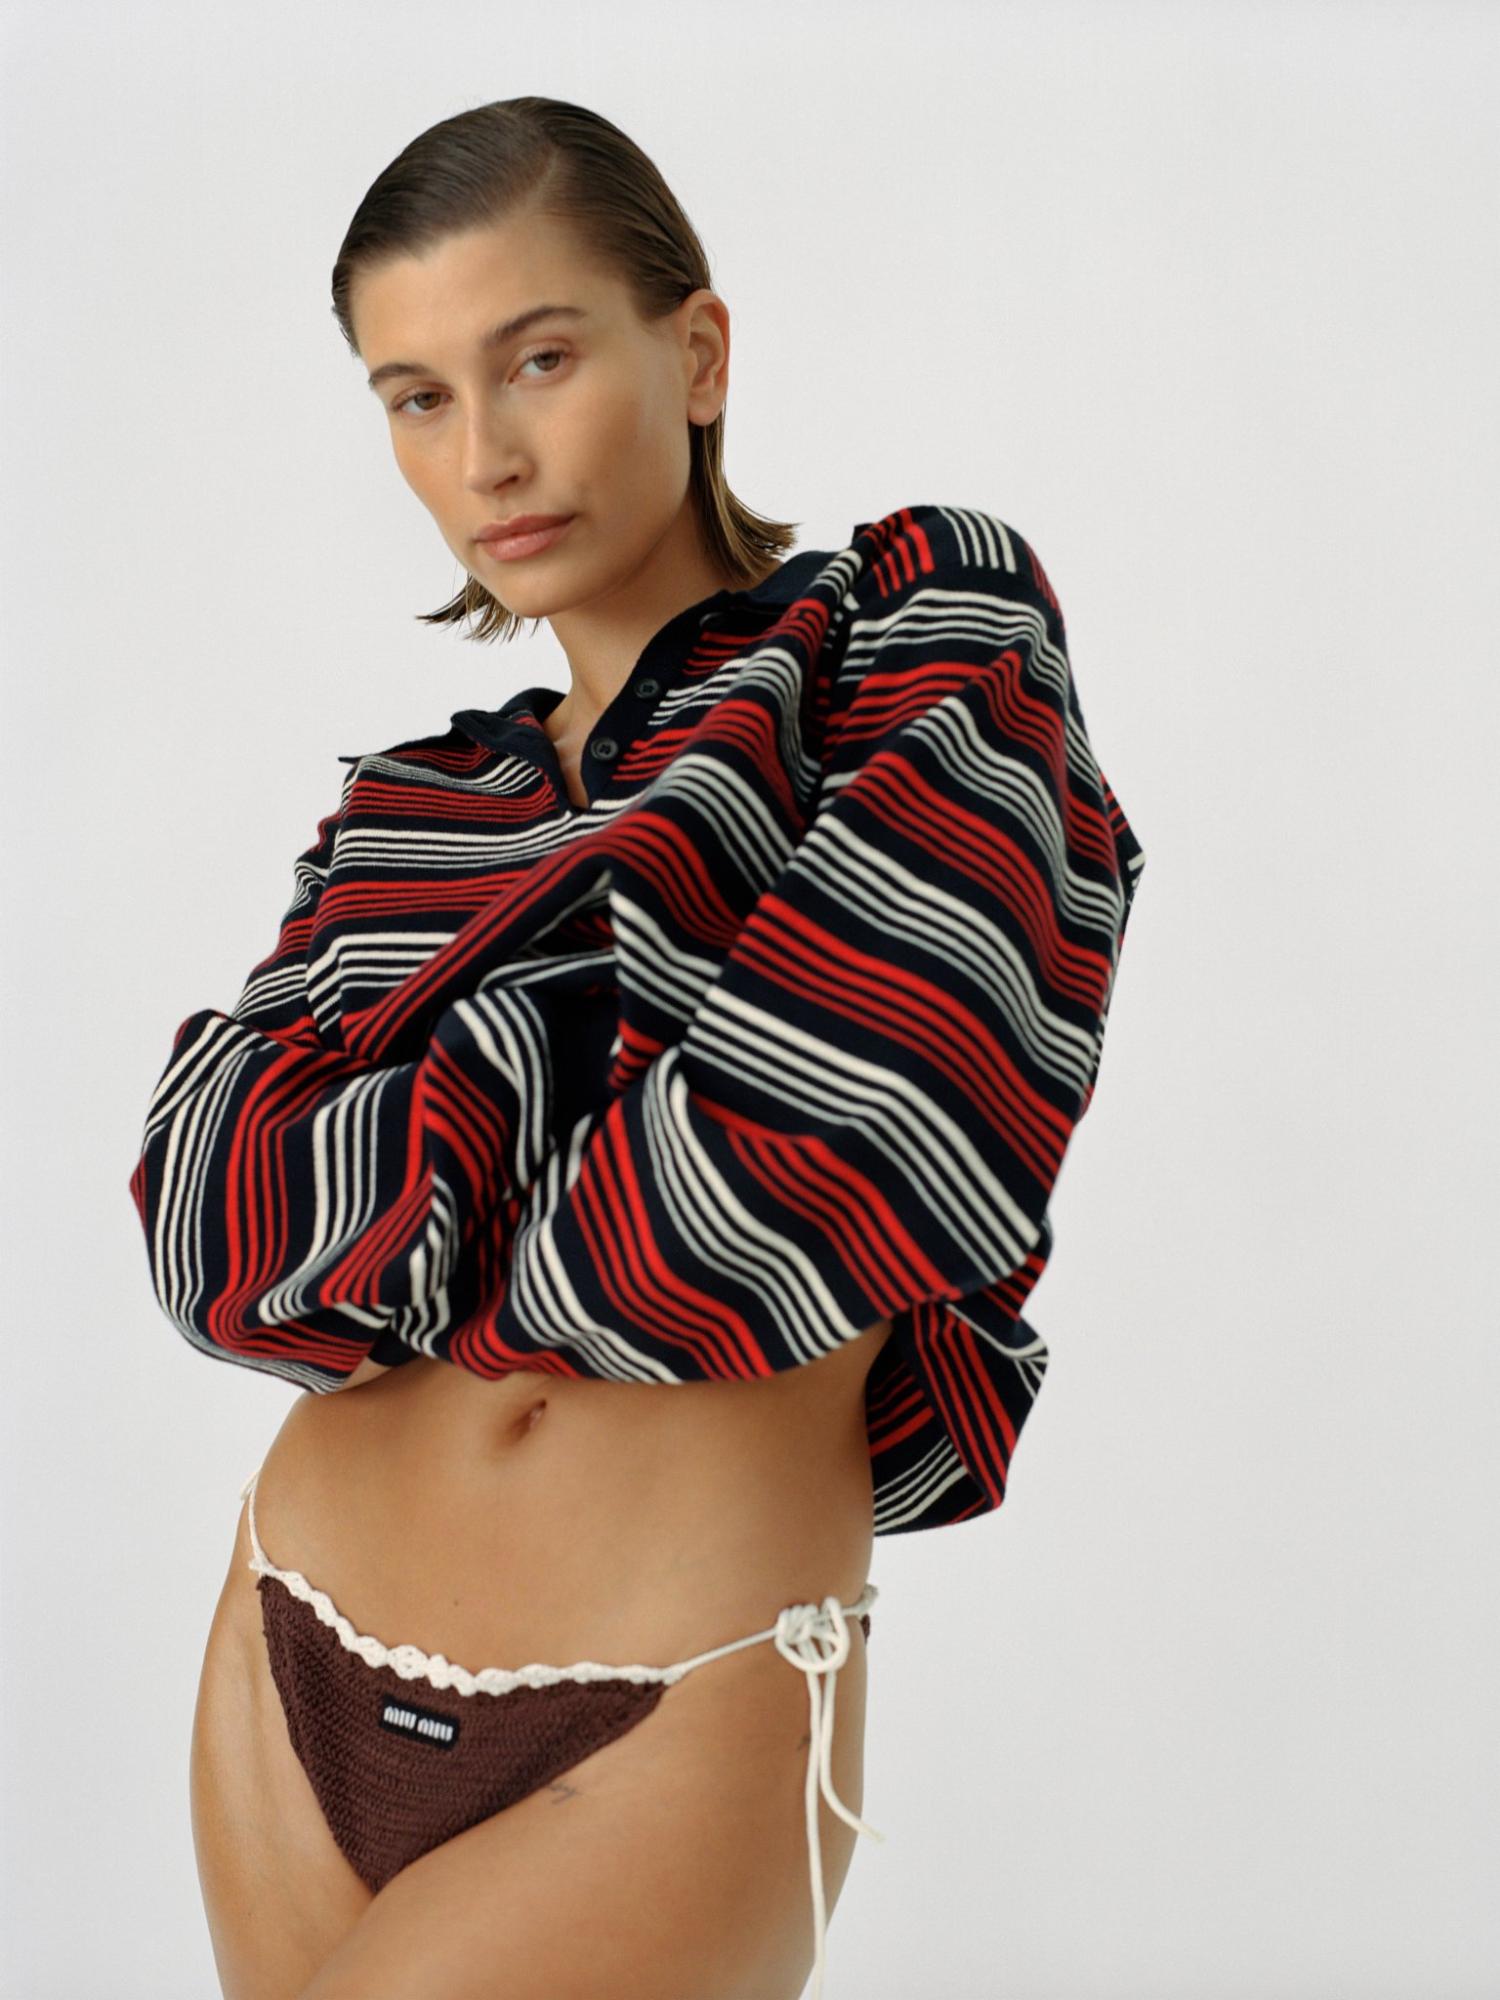 Hailey Bieber in Miu Miu by Cass Bird for The Sunday Times Style Magazine UK May 2023